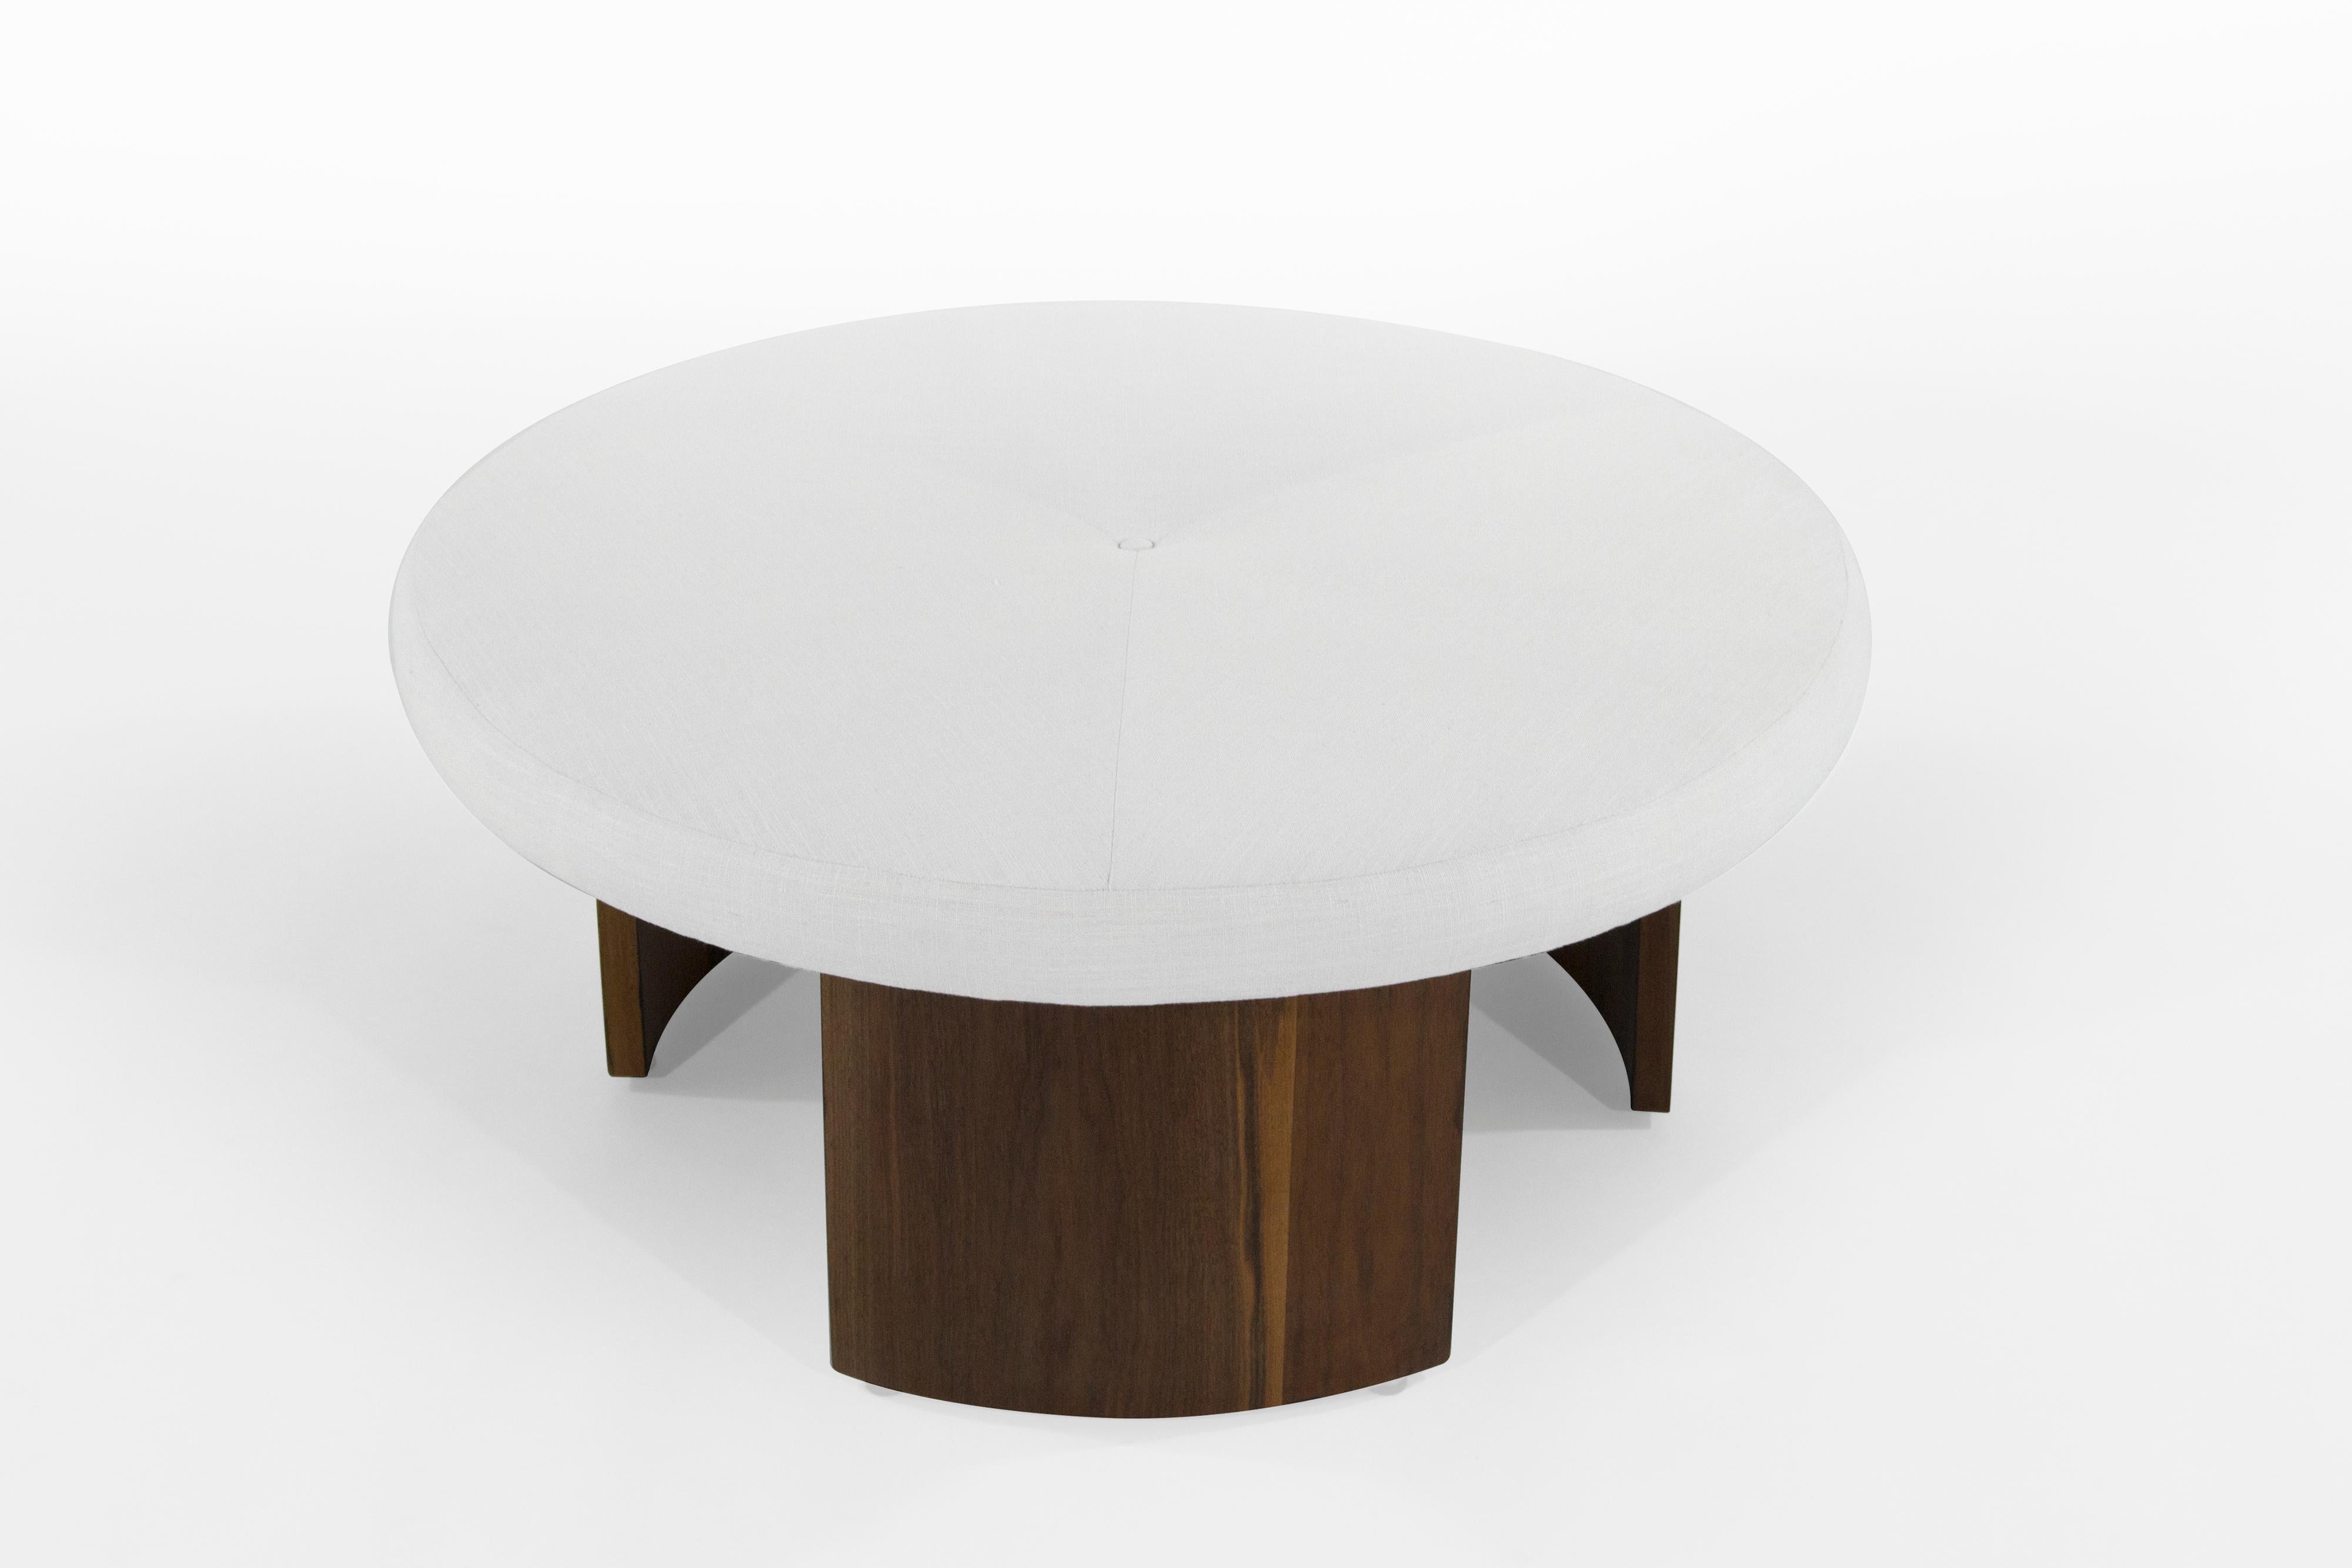 Radius collection ottoman designed by Vladimir Kagan for Selig, circa 1950s.

Walnut base featuring chrome stretchers fully restored. Newly upholstered in linen.